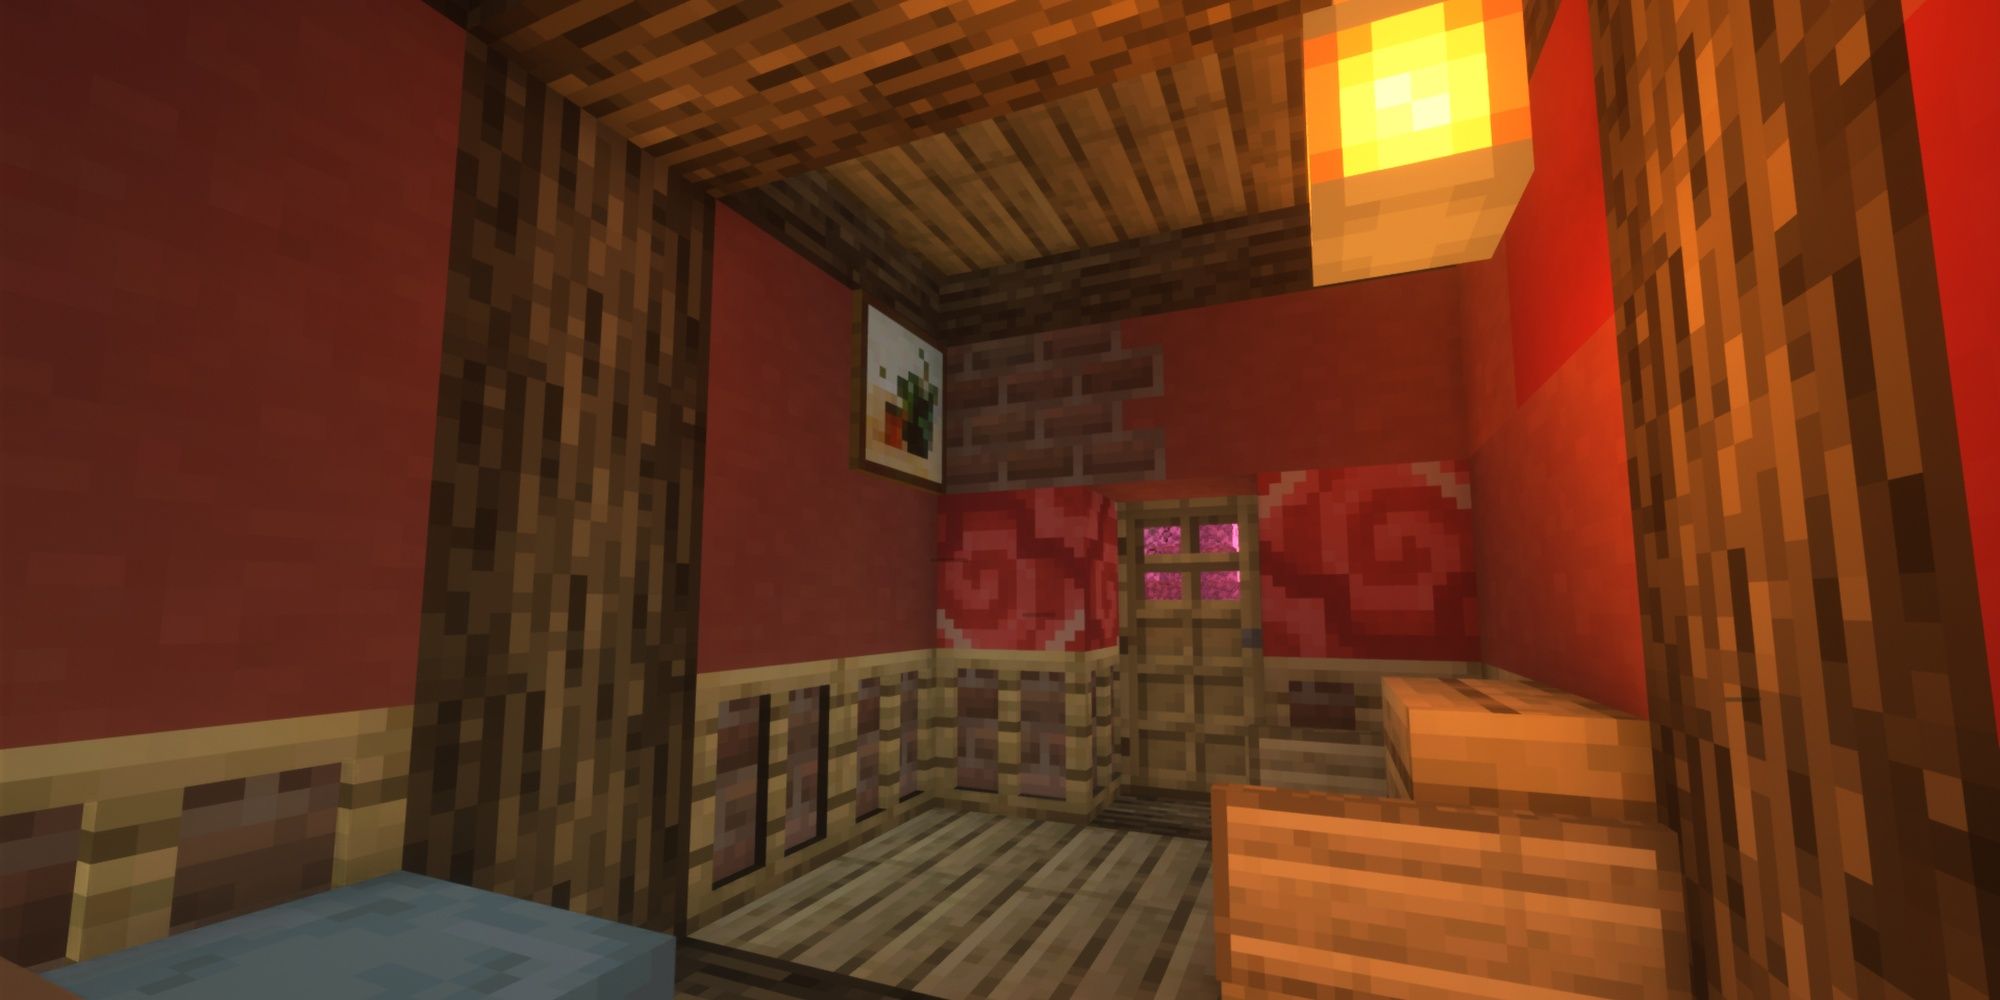 A room in Minecraft made of oak wood, brick, and terracotta.